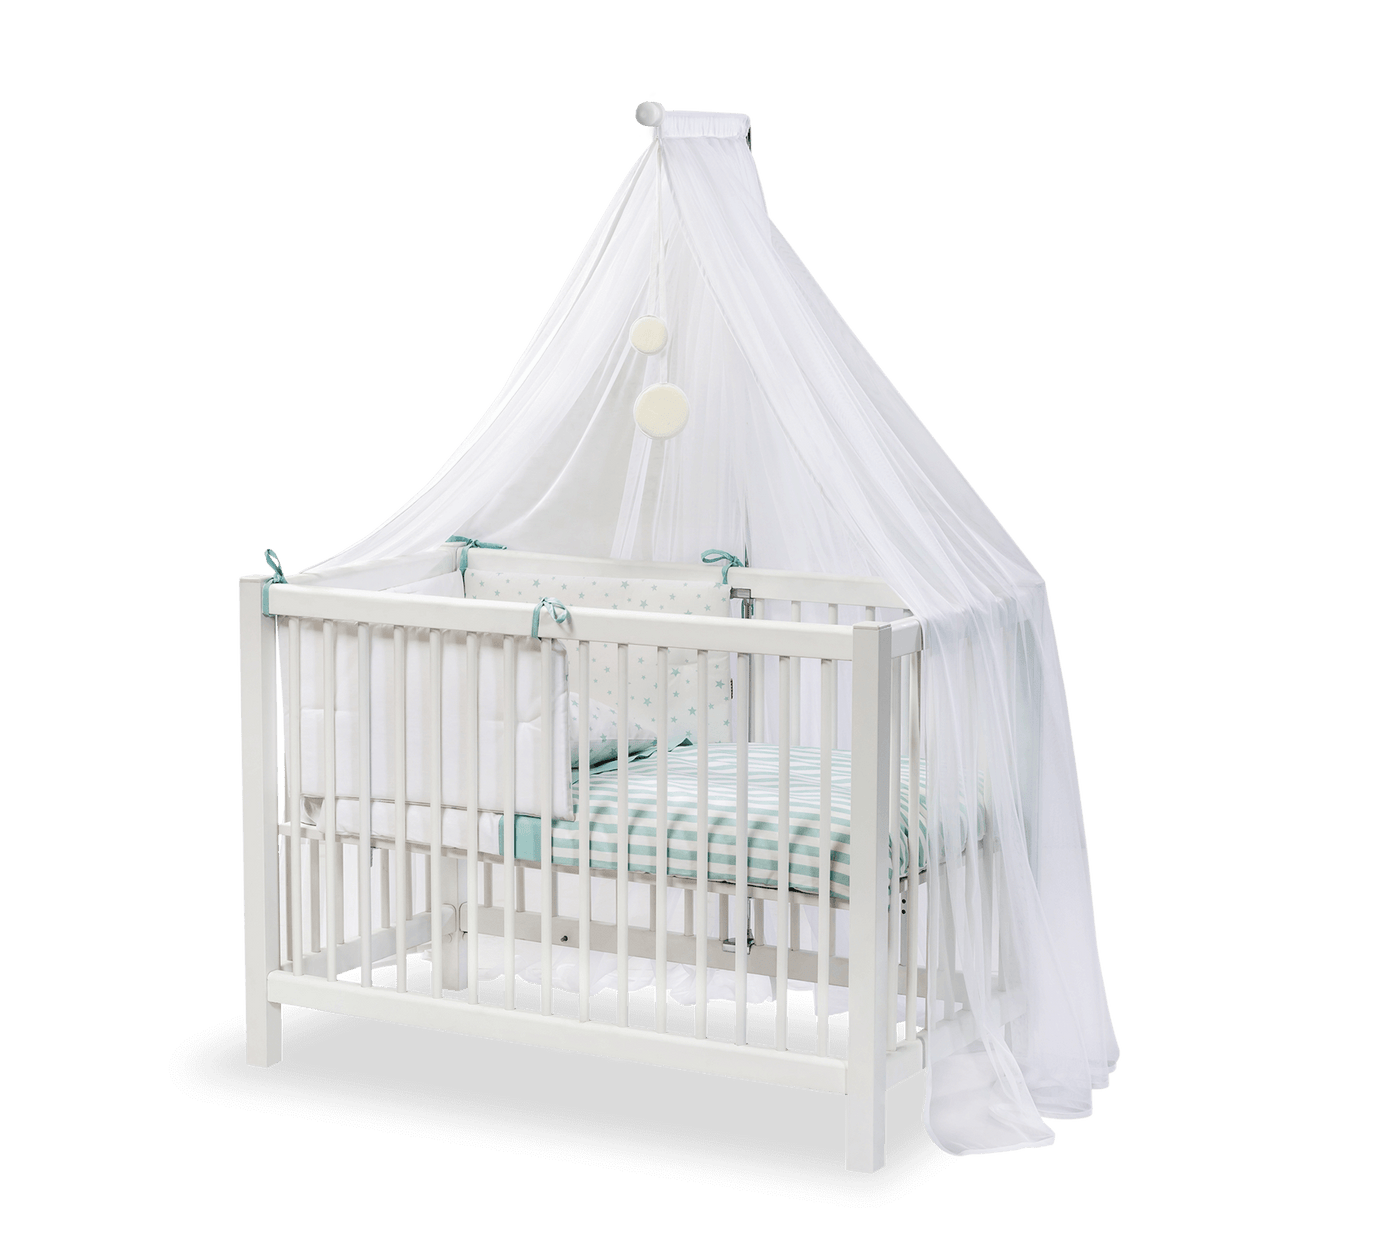 Mini Baby Bed [50x100 Cm] White - ON ORDER ONLY